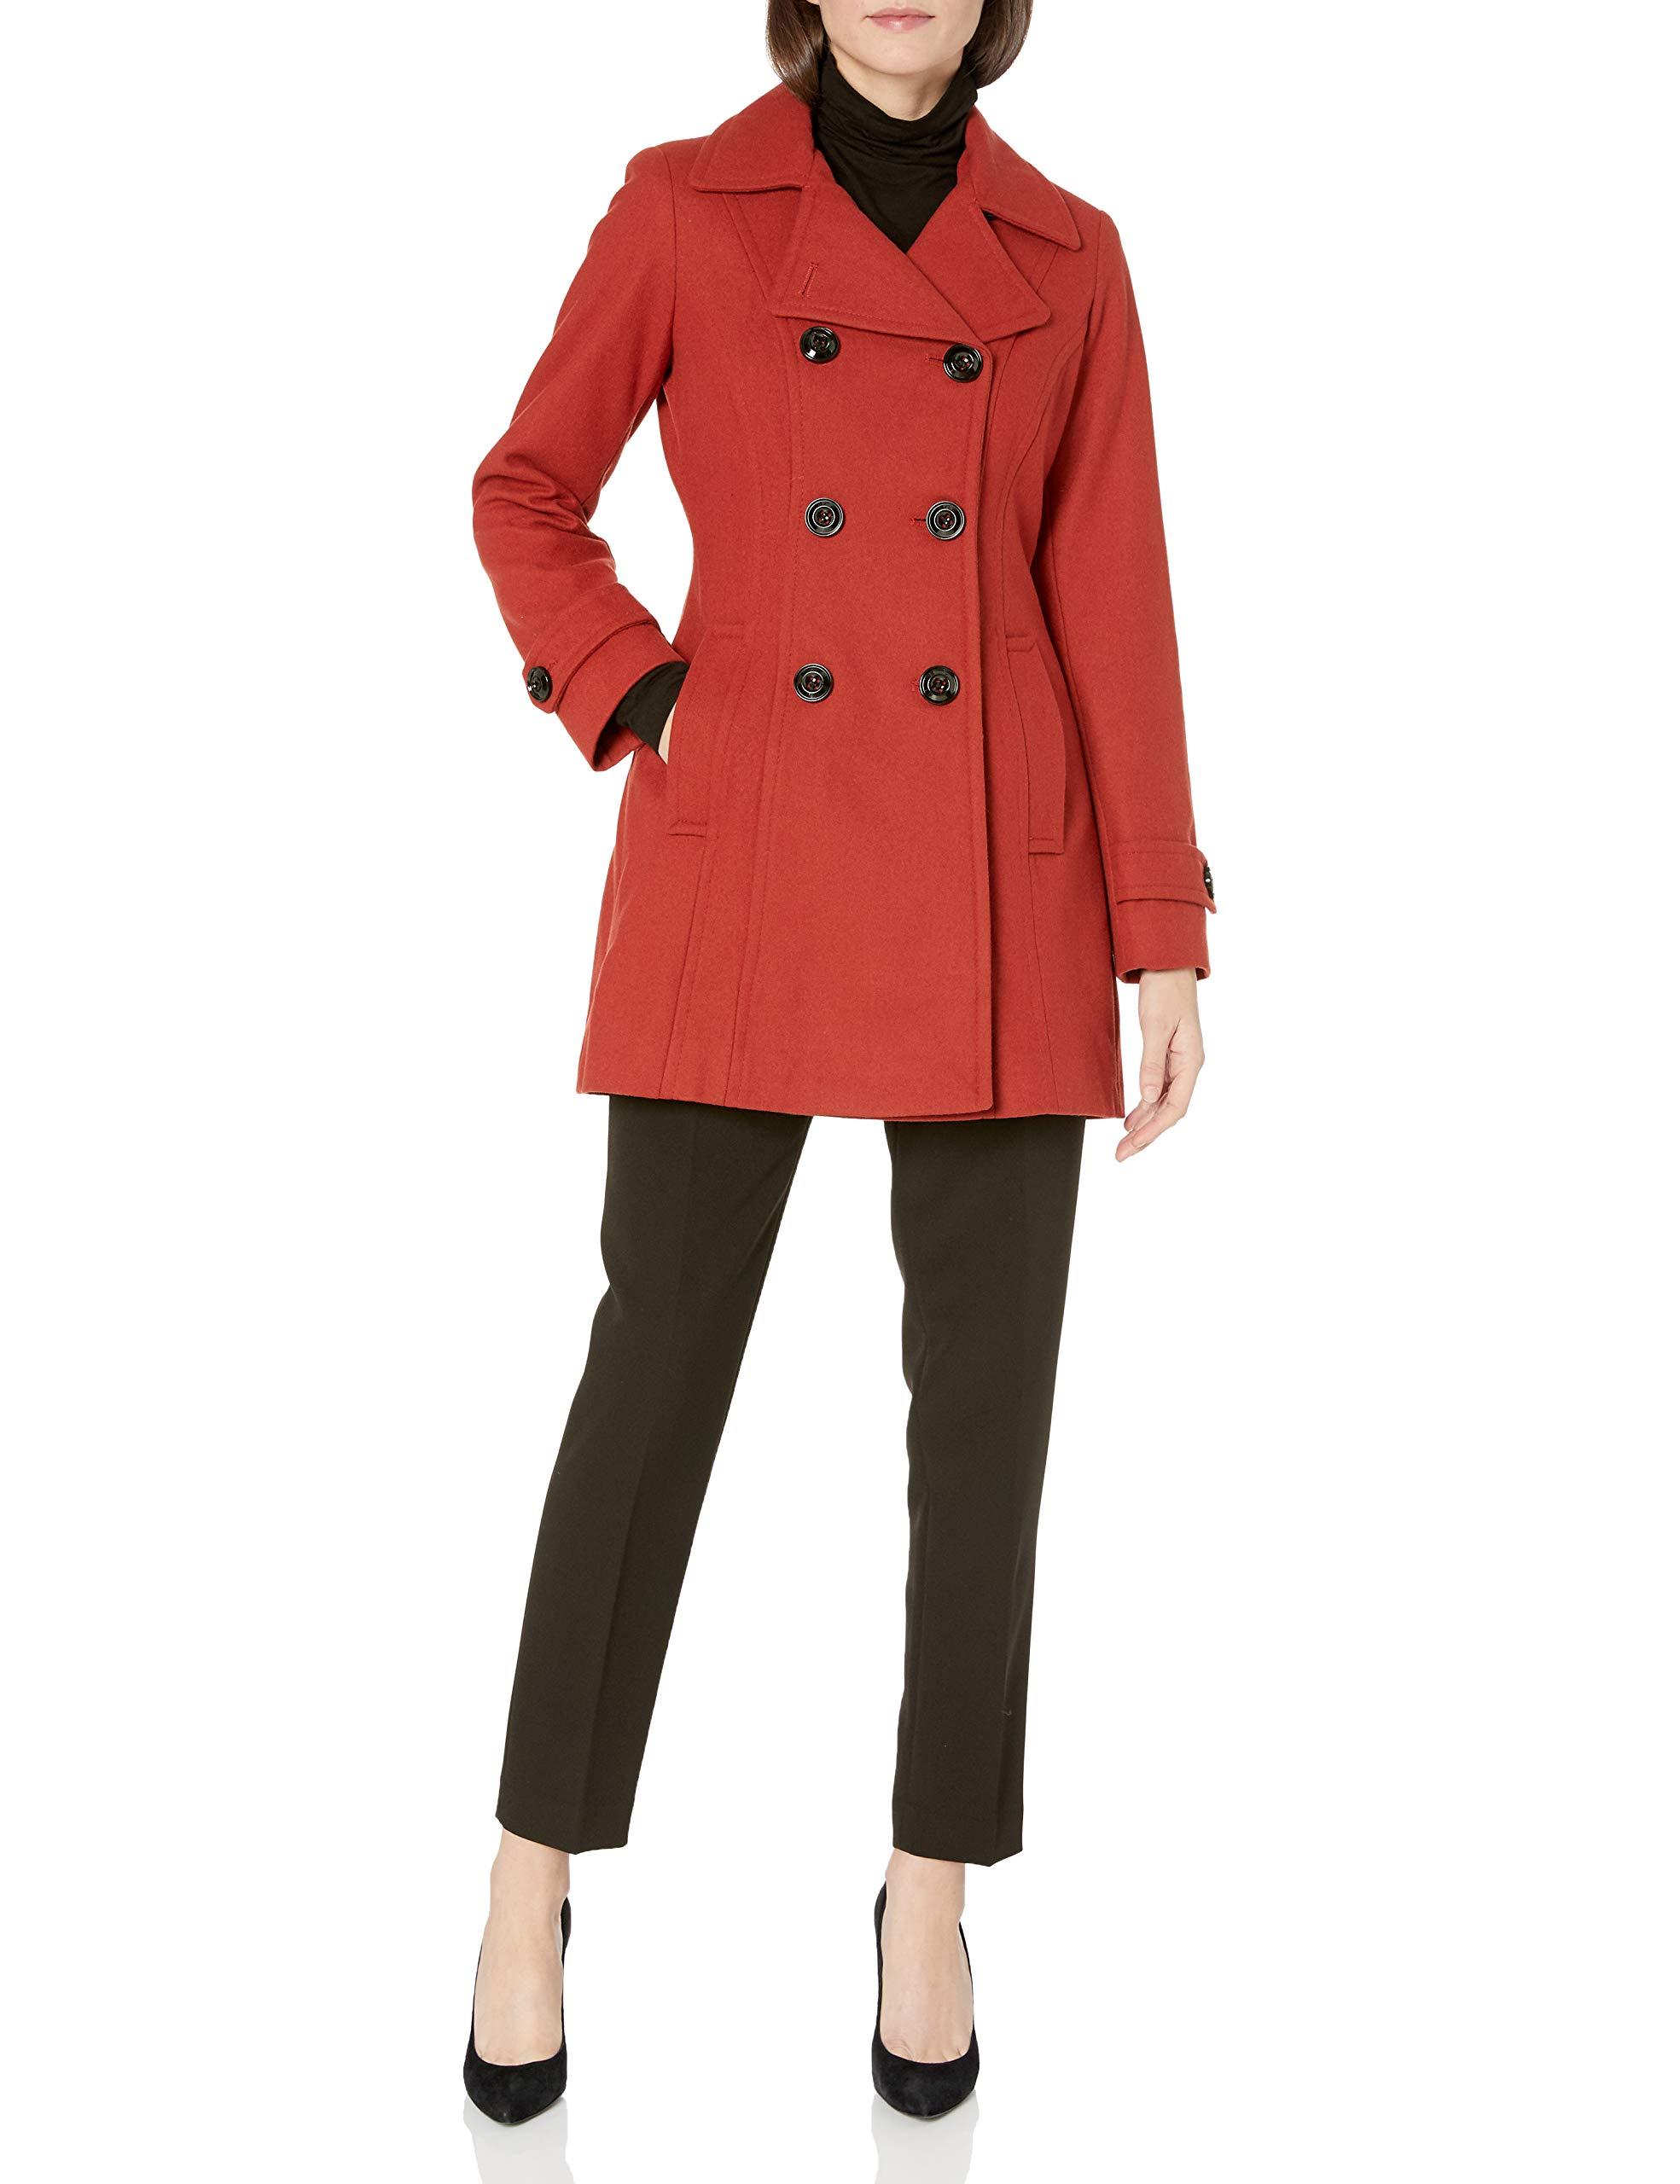 Anne Klein Wool Classic Double-breasted Coat in Red - Lyst